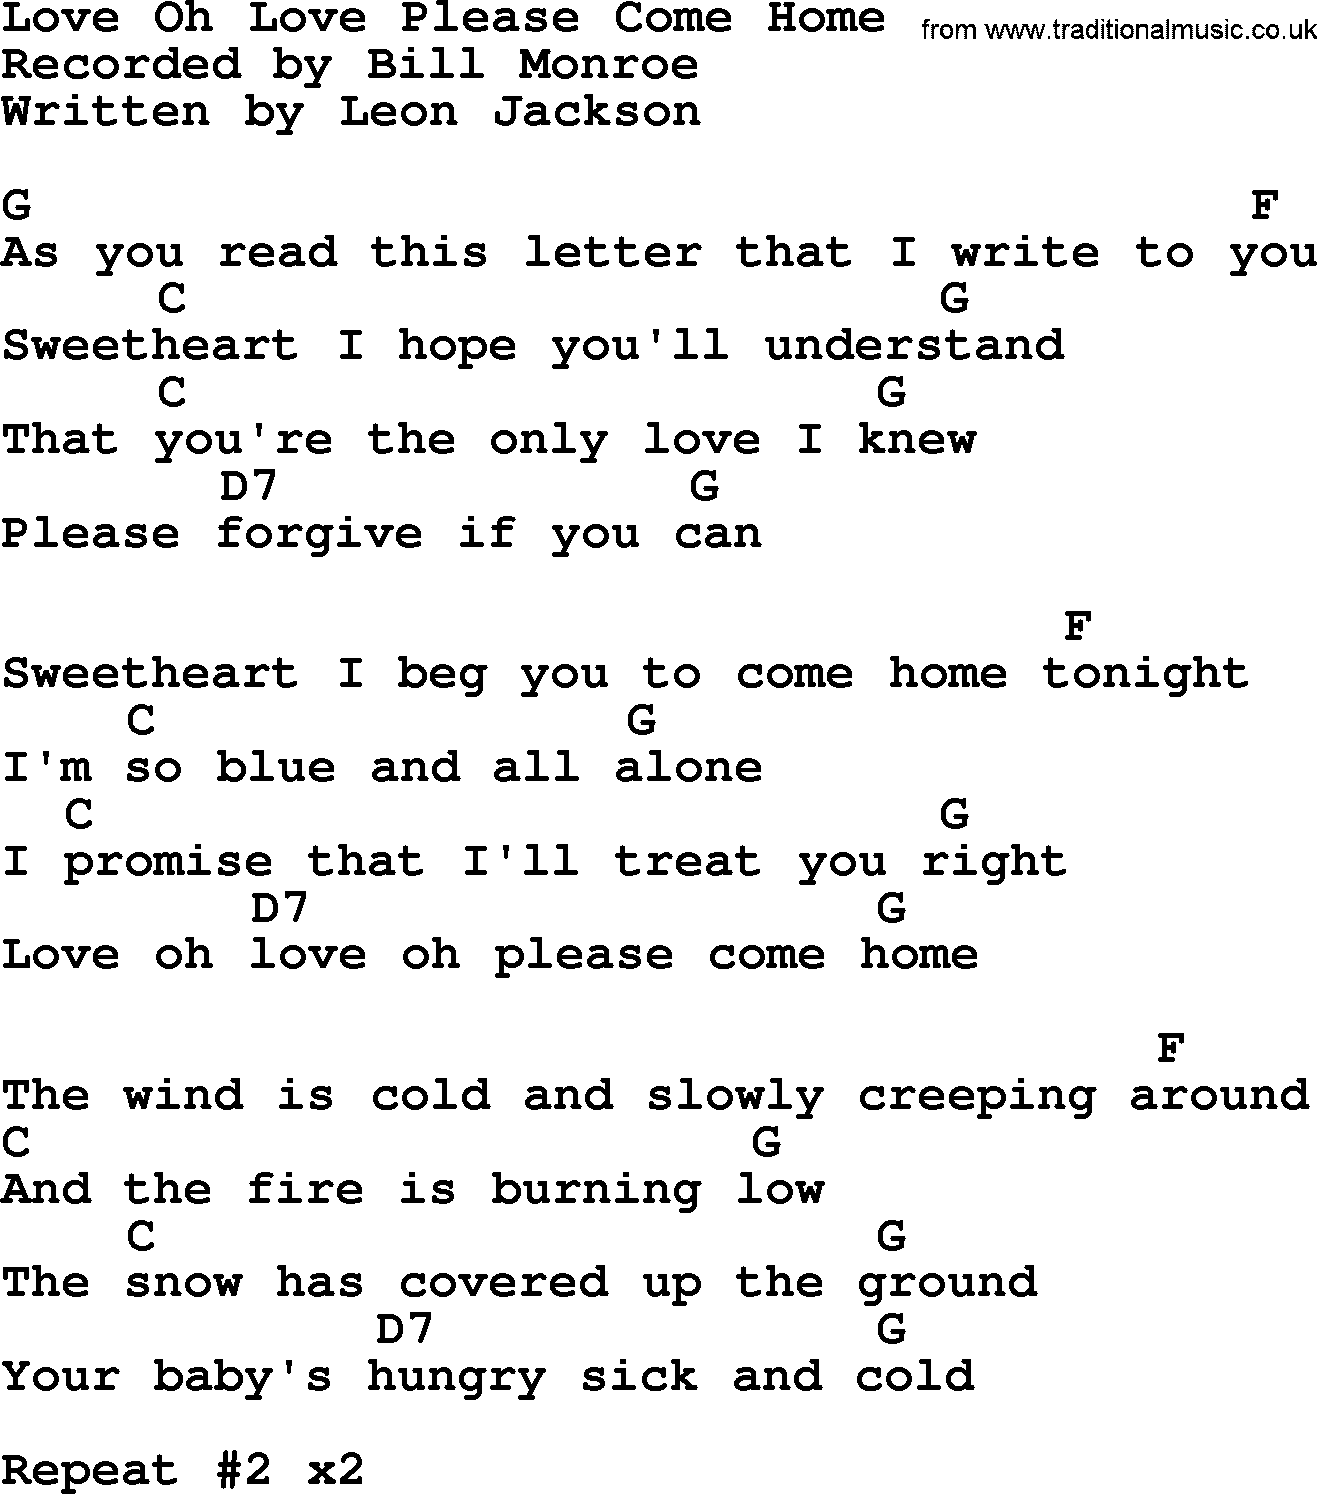 Bluegrass song: Love Oh Love Please Come Home, lyrics and chords